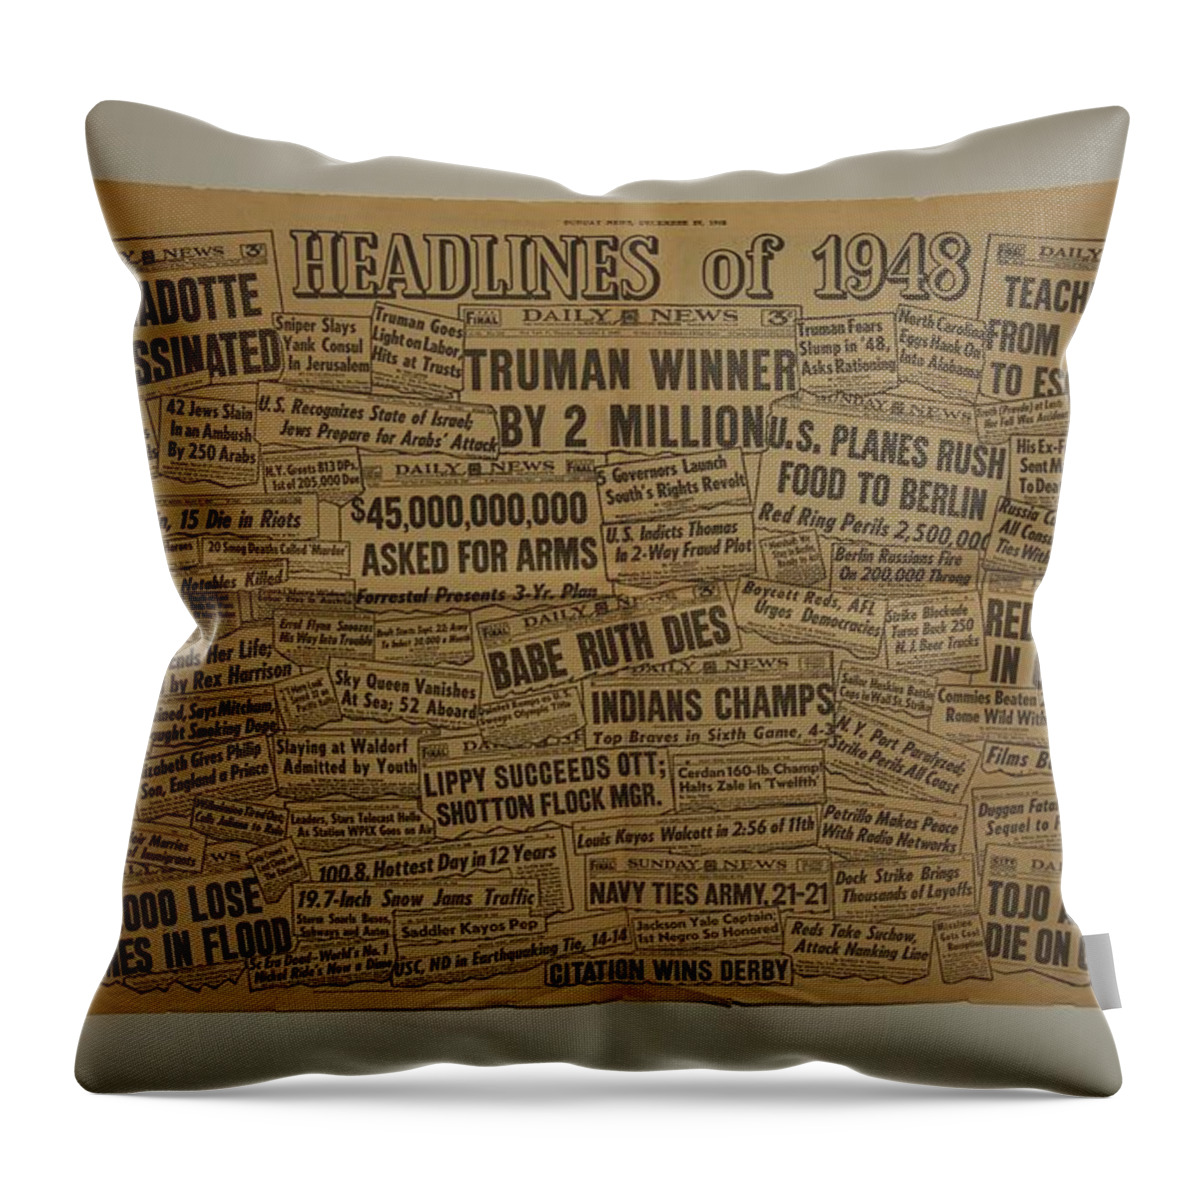 History Throw Pillow featuring the photograph 1948 Headlines by Marty Klar